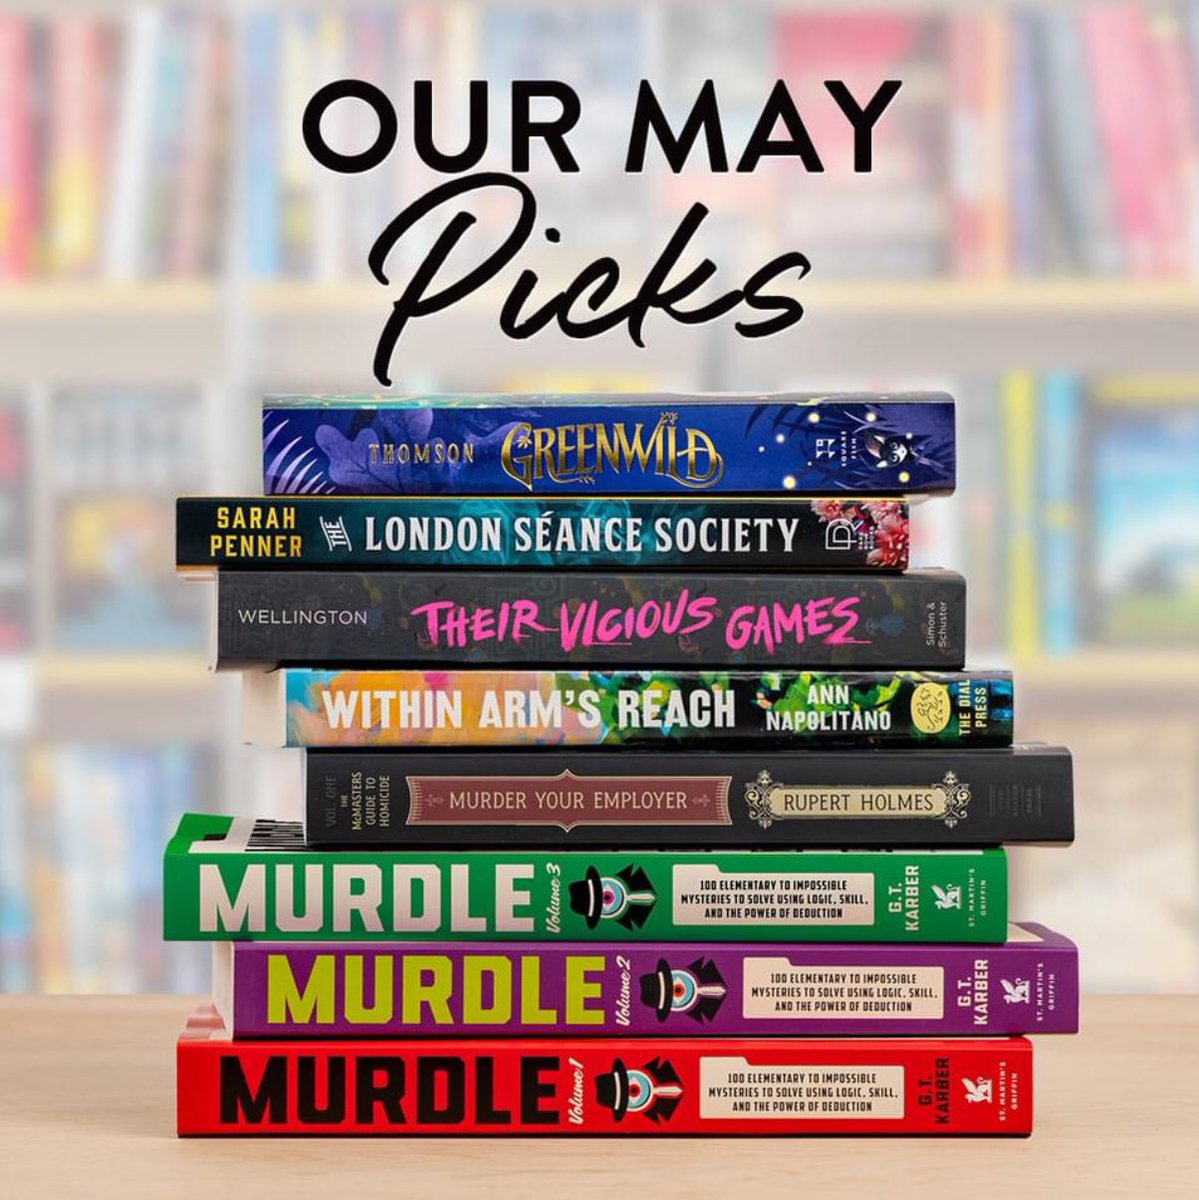 New month, new bookseller favorites! Here are our monthly picks for May: